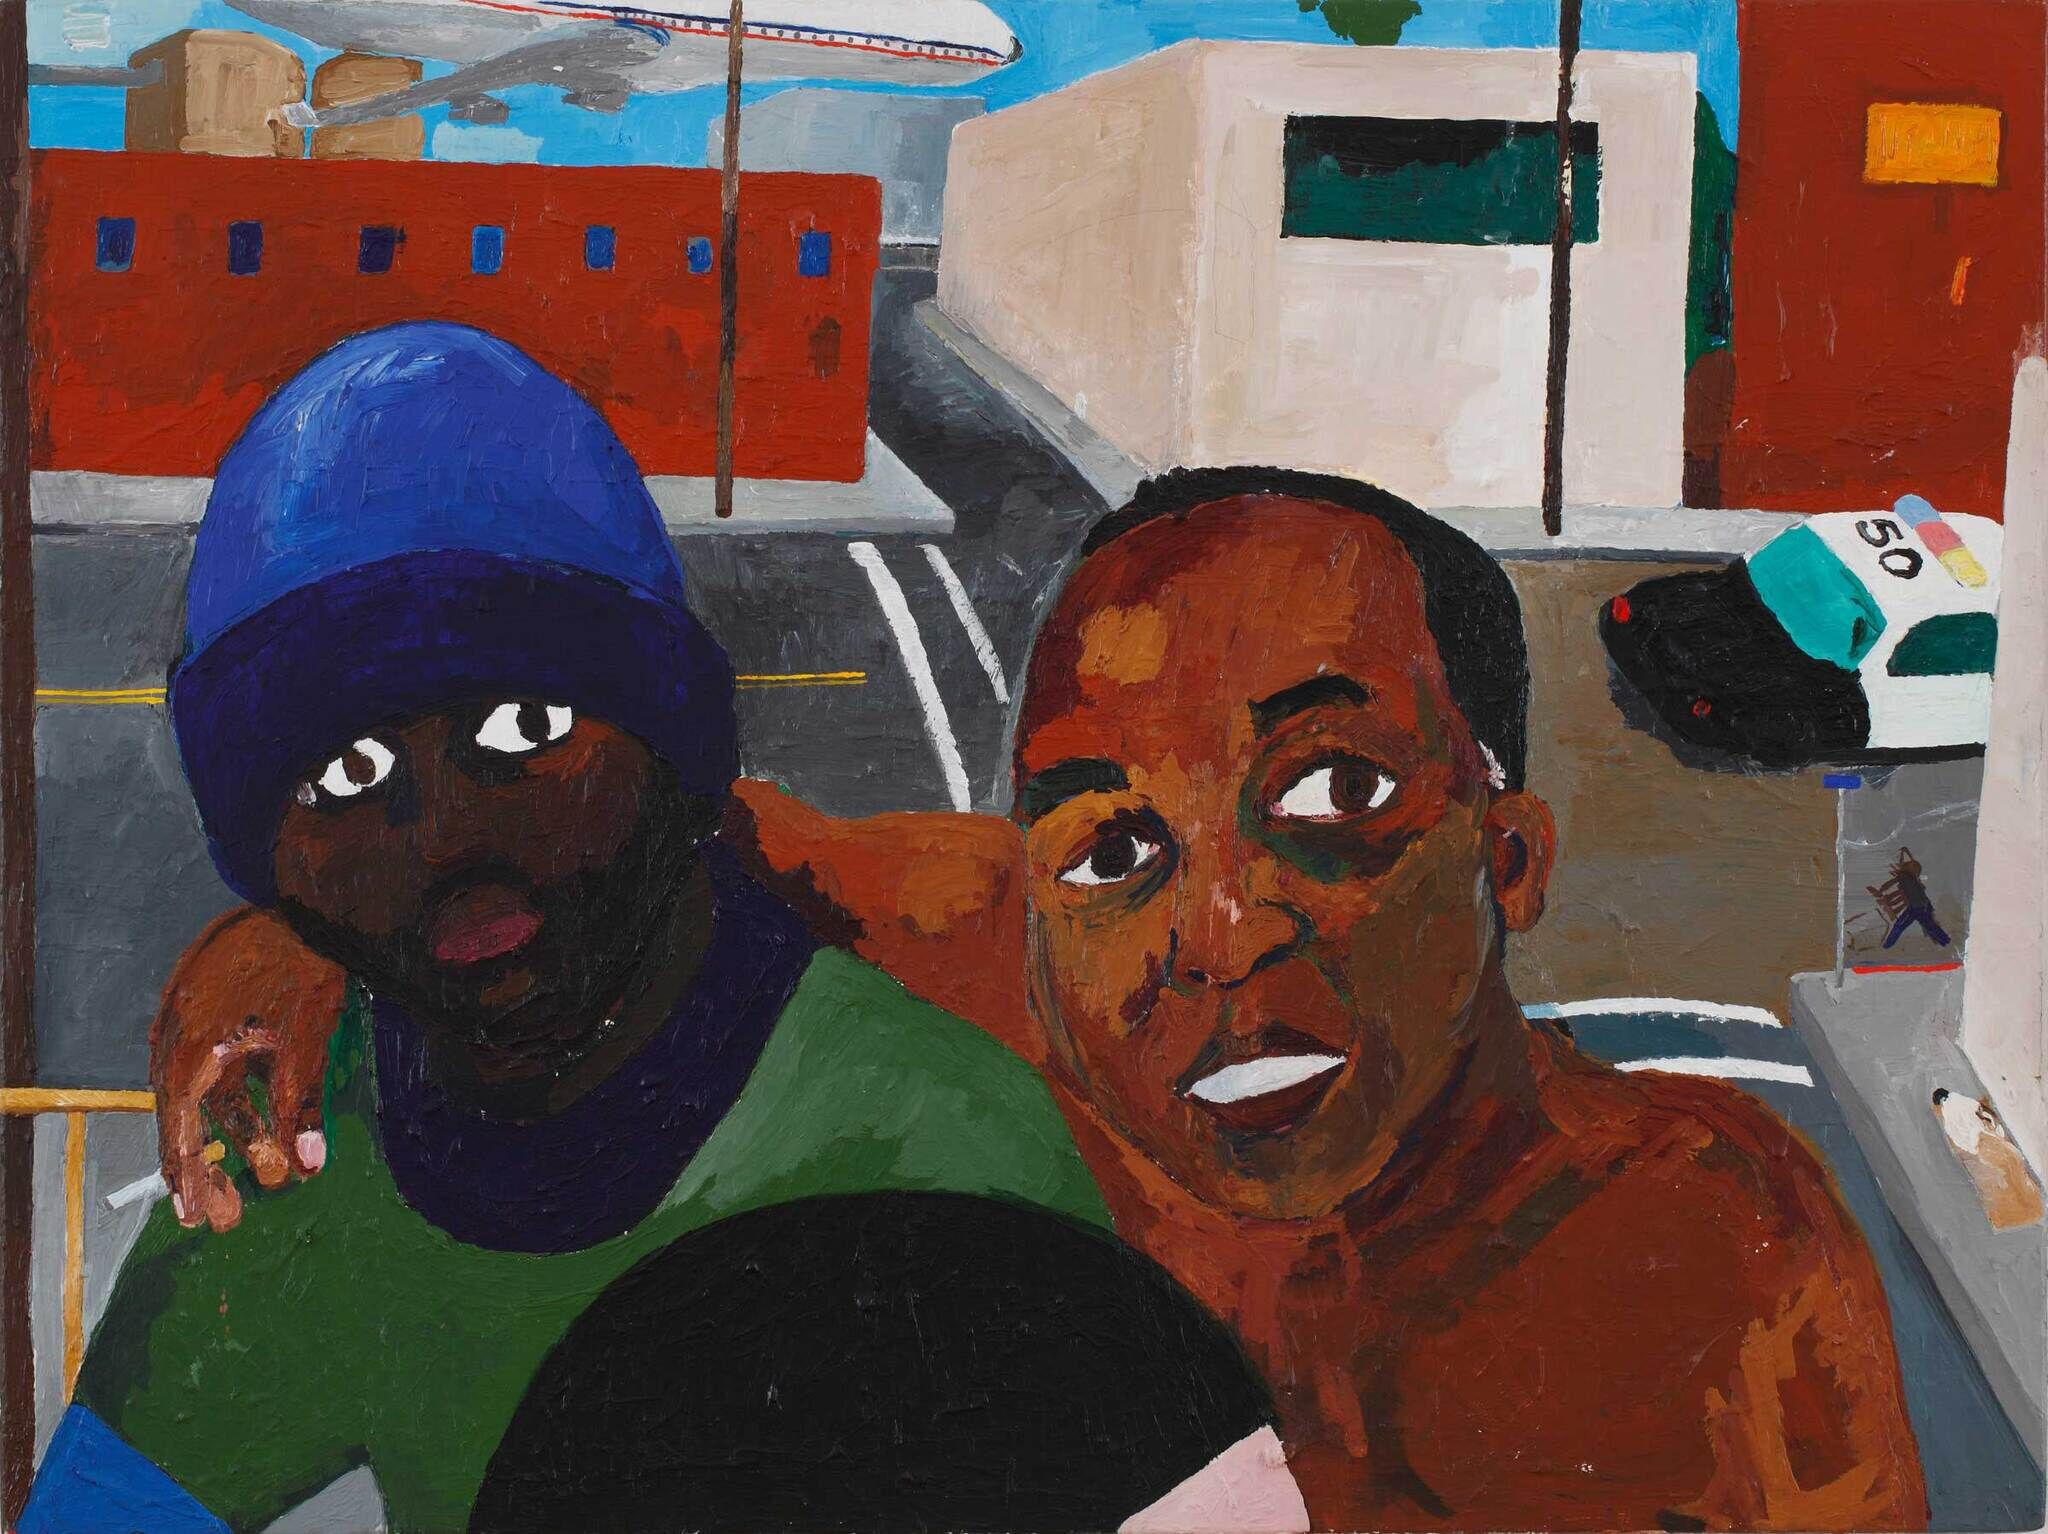 A closeup portrait of two figures posing in front of a city intersection. The figure on the left has dark skin and black beard, and is wearing a blue beanie and green shirt. The figure on the right smiles with an arm draped across the other person's shoulders. In the background, a body lies on the sidewalk, not far from a police car on the road.